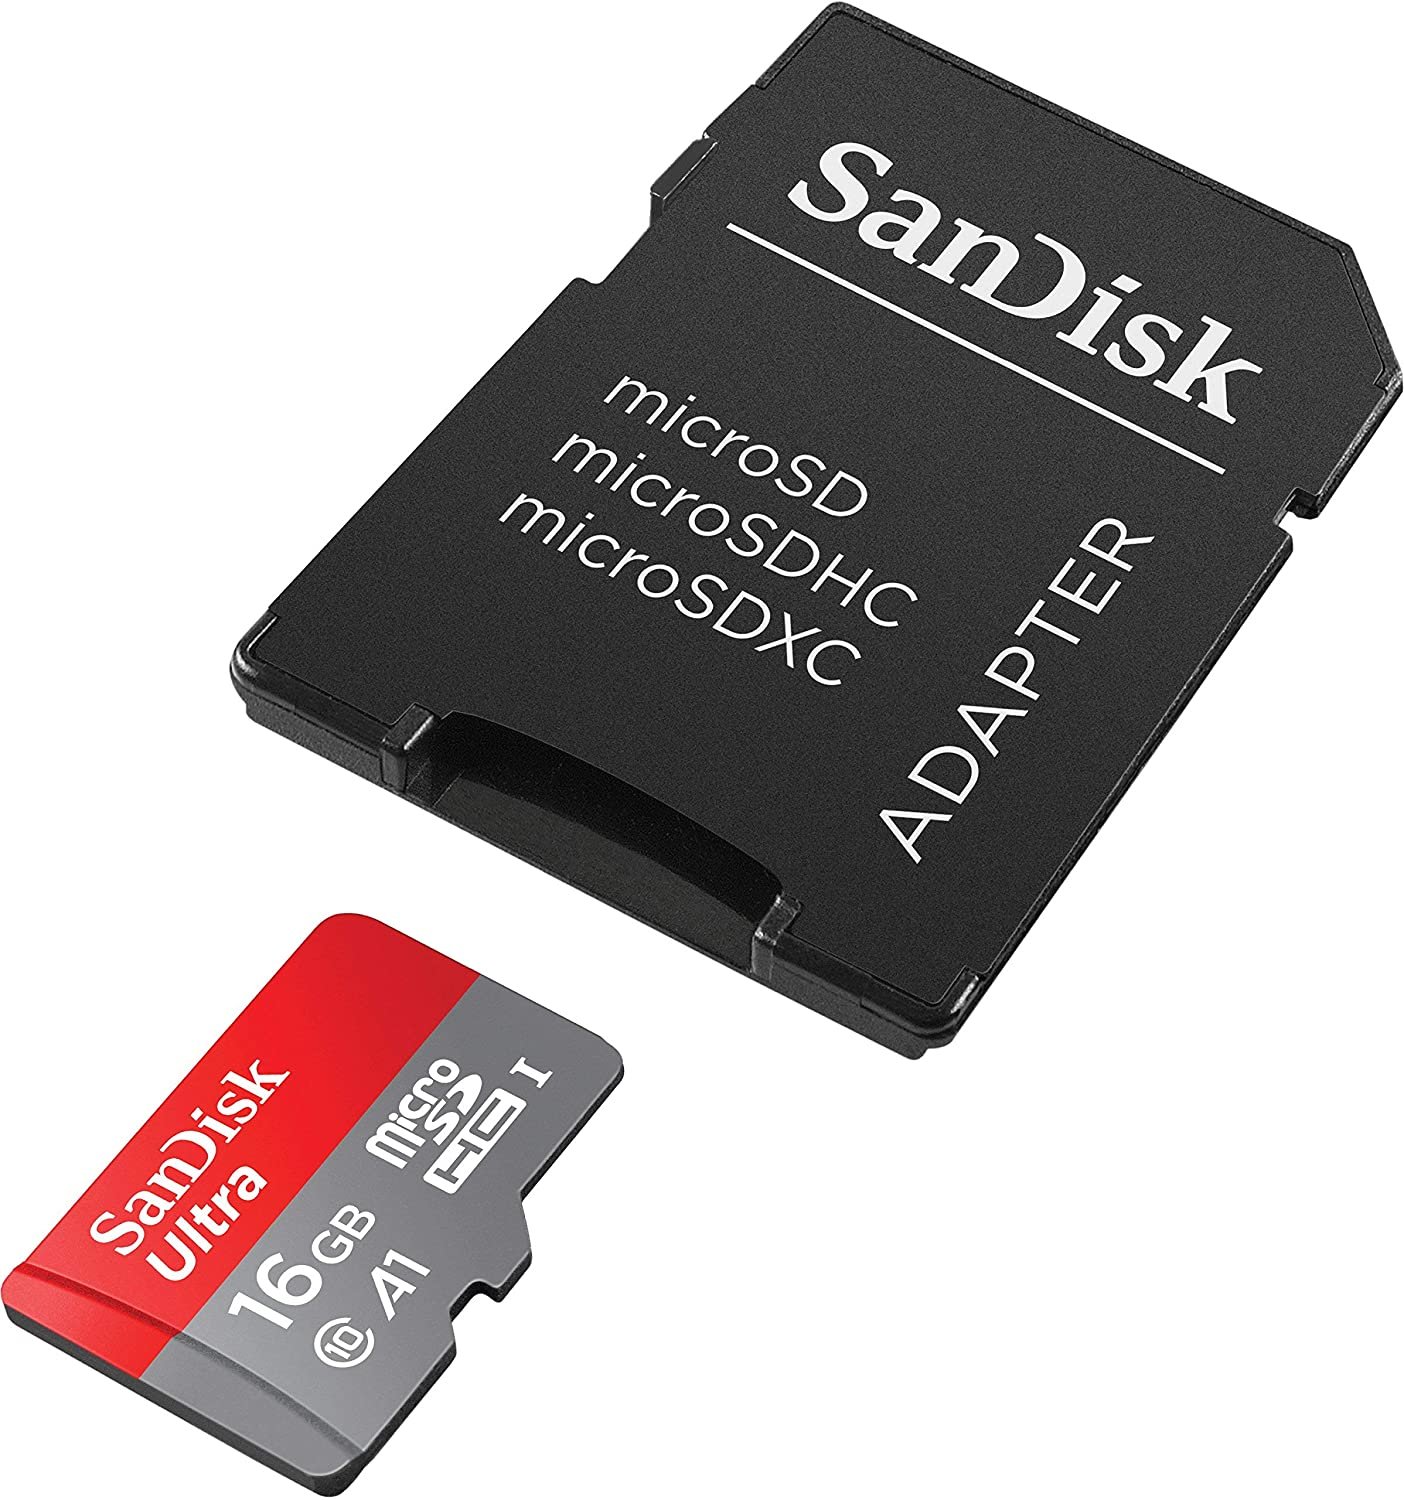 Sandisk Memory Card 16GB with adapter